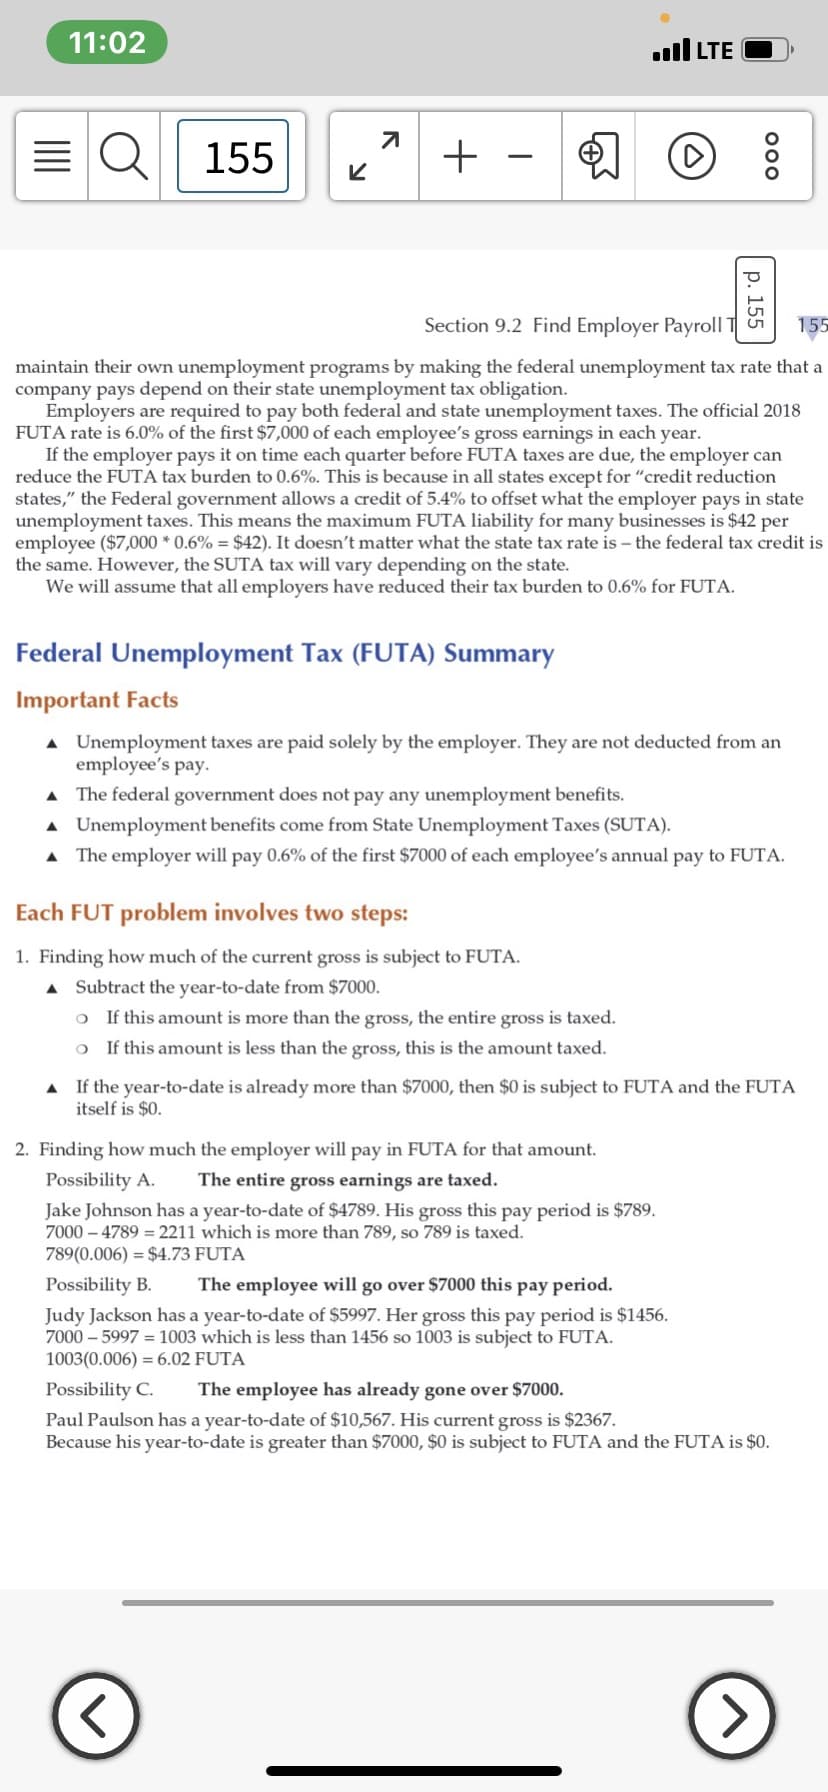 11:02
ll LTE
155
+
Section 9.2 Find Employer Payroll T
155
maintain their own unemployment programs by making the federal unemployment tax rate that a
company pays depend on their state unemployment tax obligation.
Employers are required to pay both federal and state unemployment taxes. The official 2018
FUTA rate is 6.0% of the first $7,000 of each employee's gross earnings in each year.
If the employer pays it on time each quarter before FUTA taxes are due, the employer can
reduce the FUTA tax burden to 0.6%. This is because in all states except for "credit reduction
states," the Federal government allows a credit of 5.4% to offset what the employer pays in state
unemployment taxes. This means the maximum FUTA liability for many businesses is $42 per
employee ($7,000 * 0.6% = $42). It doesn't matter what the state tax rate is – the federal tax credit is
the same. However, the SUTA tax will vary depending on the state.
We will assume that all employers have reduced their tax burden to 0.6% for FUTA.
Federal Unemployment Tax (FUTA) Summary
Important Facts
A Unemployment taxes are paid solely by the employer. They are not deducted from an
employee's pay.
A The federal government does not pay any unemployment benefits.
A Unemployment benefits come from State Unemployment Taxes (SUTA).
A The employer will pay 0.6% of the first $7000 of each employee's annual pay to FUTA.
Each FUT problem involves two steps:
1. Finding how much of the current gross is subject to FUTA.
A Subtract the year-to-date from $7000.
o If this amount is more than the gross, the entire gross is taxed.
o If this amount is less than the gross, this is the amount taxed.
A If the year-to-date is already more than $7000, then $0 is subject to FUTA and the FUTA
itself is $0.
2. Finding how much the employer will pay in FUTA for that amount.
Possibility A.
The entire gross earnings are taxed.
Jake Johnson has a year-to-date of $4789. His gross this pay period is $789.
7000 – 4789 = 2211 which is more than 789, so 789 is taxed.
789(0.006) = $4.73 FUTA
Possibility B.
The employee will go over $7000 this pay period.
Judy Jackson has a year-to-date of $5997. Her gross this pay period is $1456.
7000 – 5997 = 1003 which is less than 1456 so 1003 is subject to FUTA.
1003(0.006) = 6.02 FUTA
Possibility C.
The employee has already gone over $7000.
Paul Paulson has a year-to-date of $10,567. His current gross is $2367.
Because his year-to-date is greater than $7000, $0 is subject to FUTA and the FUTA is $0.
p. 155
